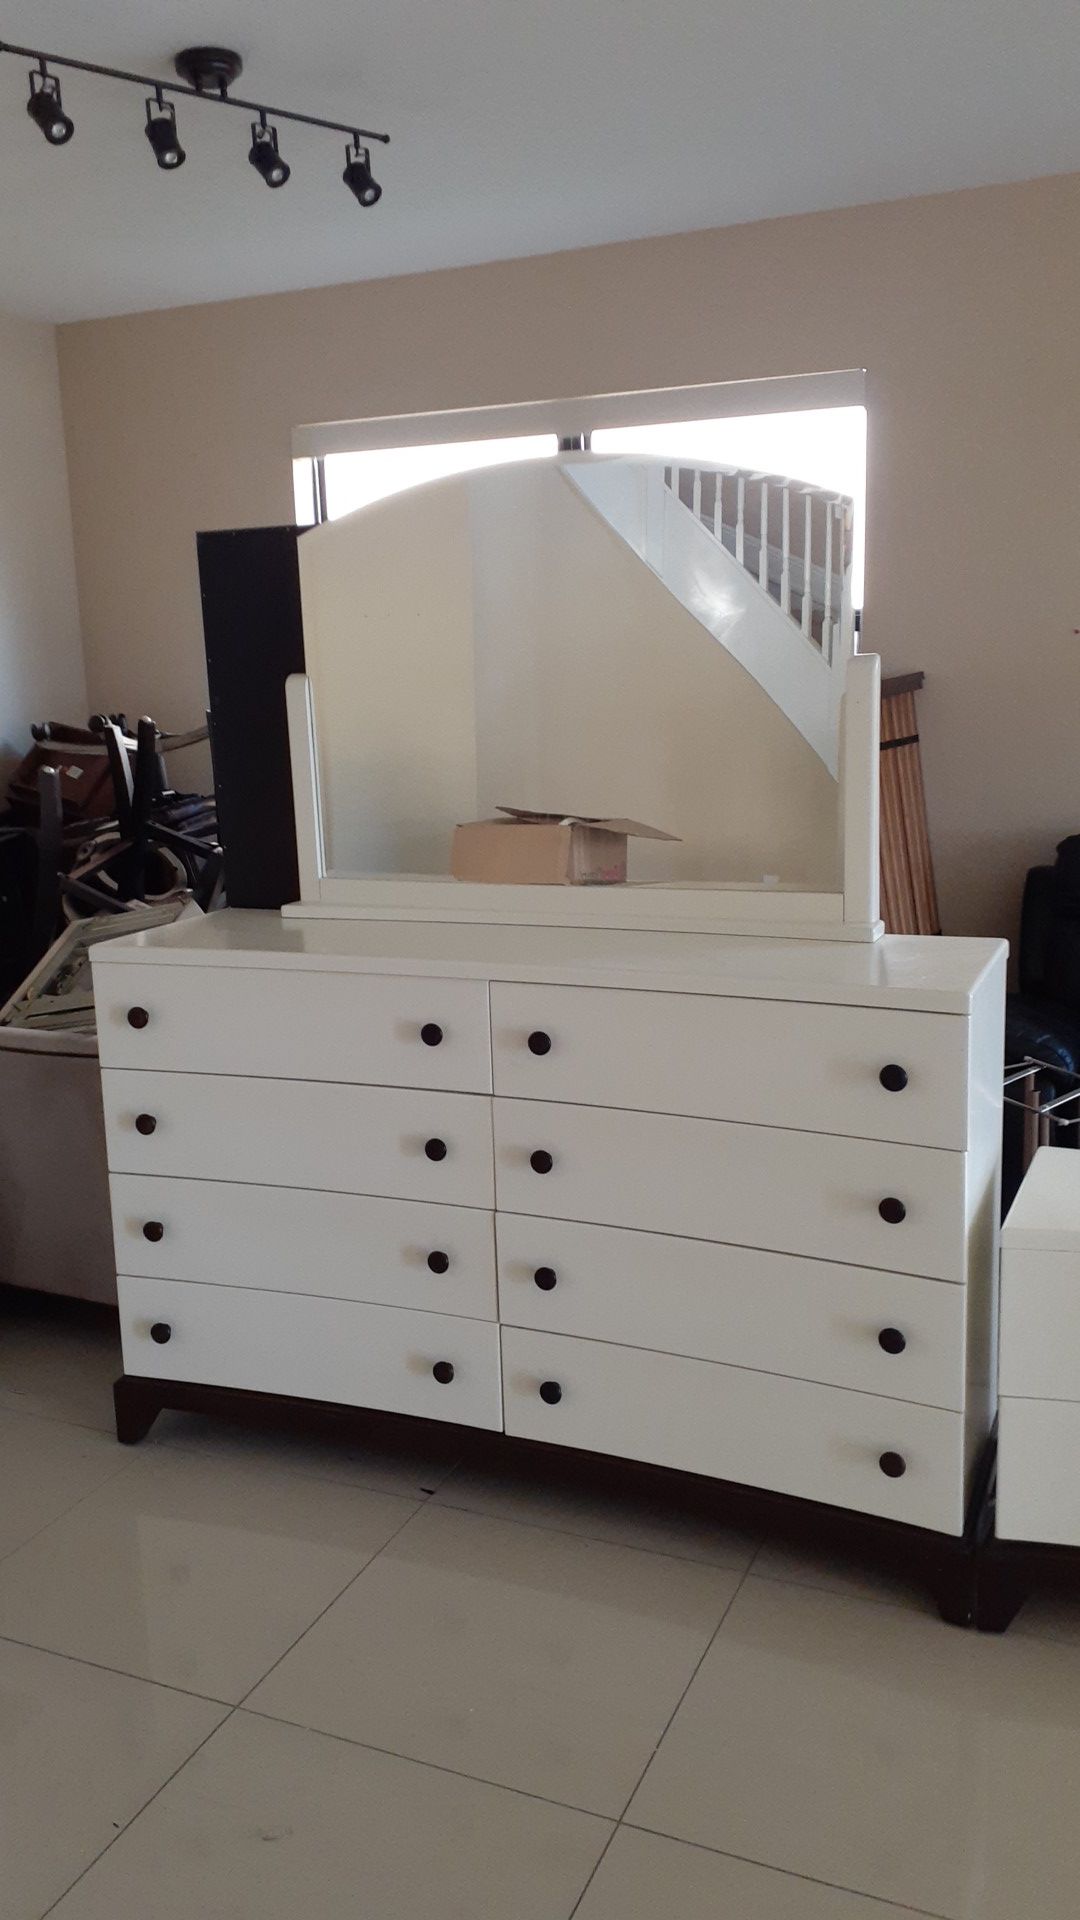 Large Bureau and Dresser set in good condition